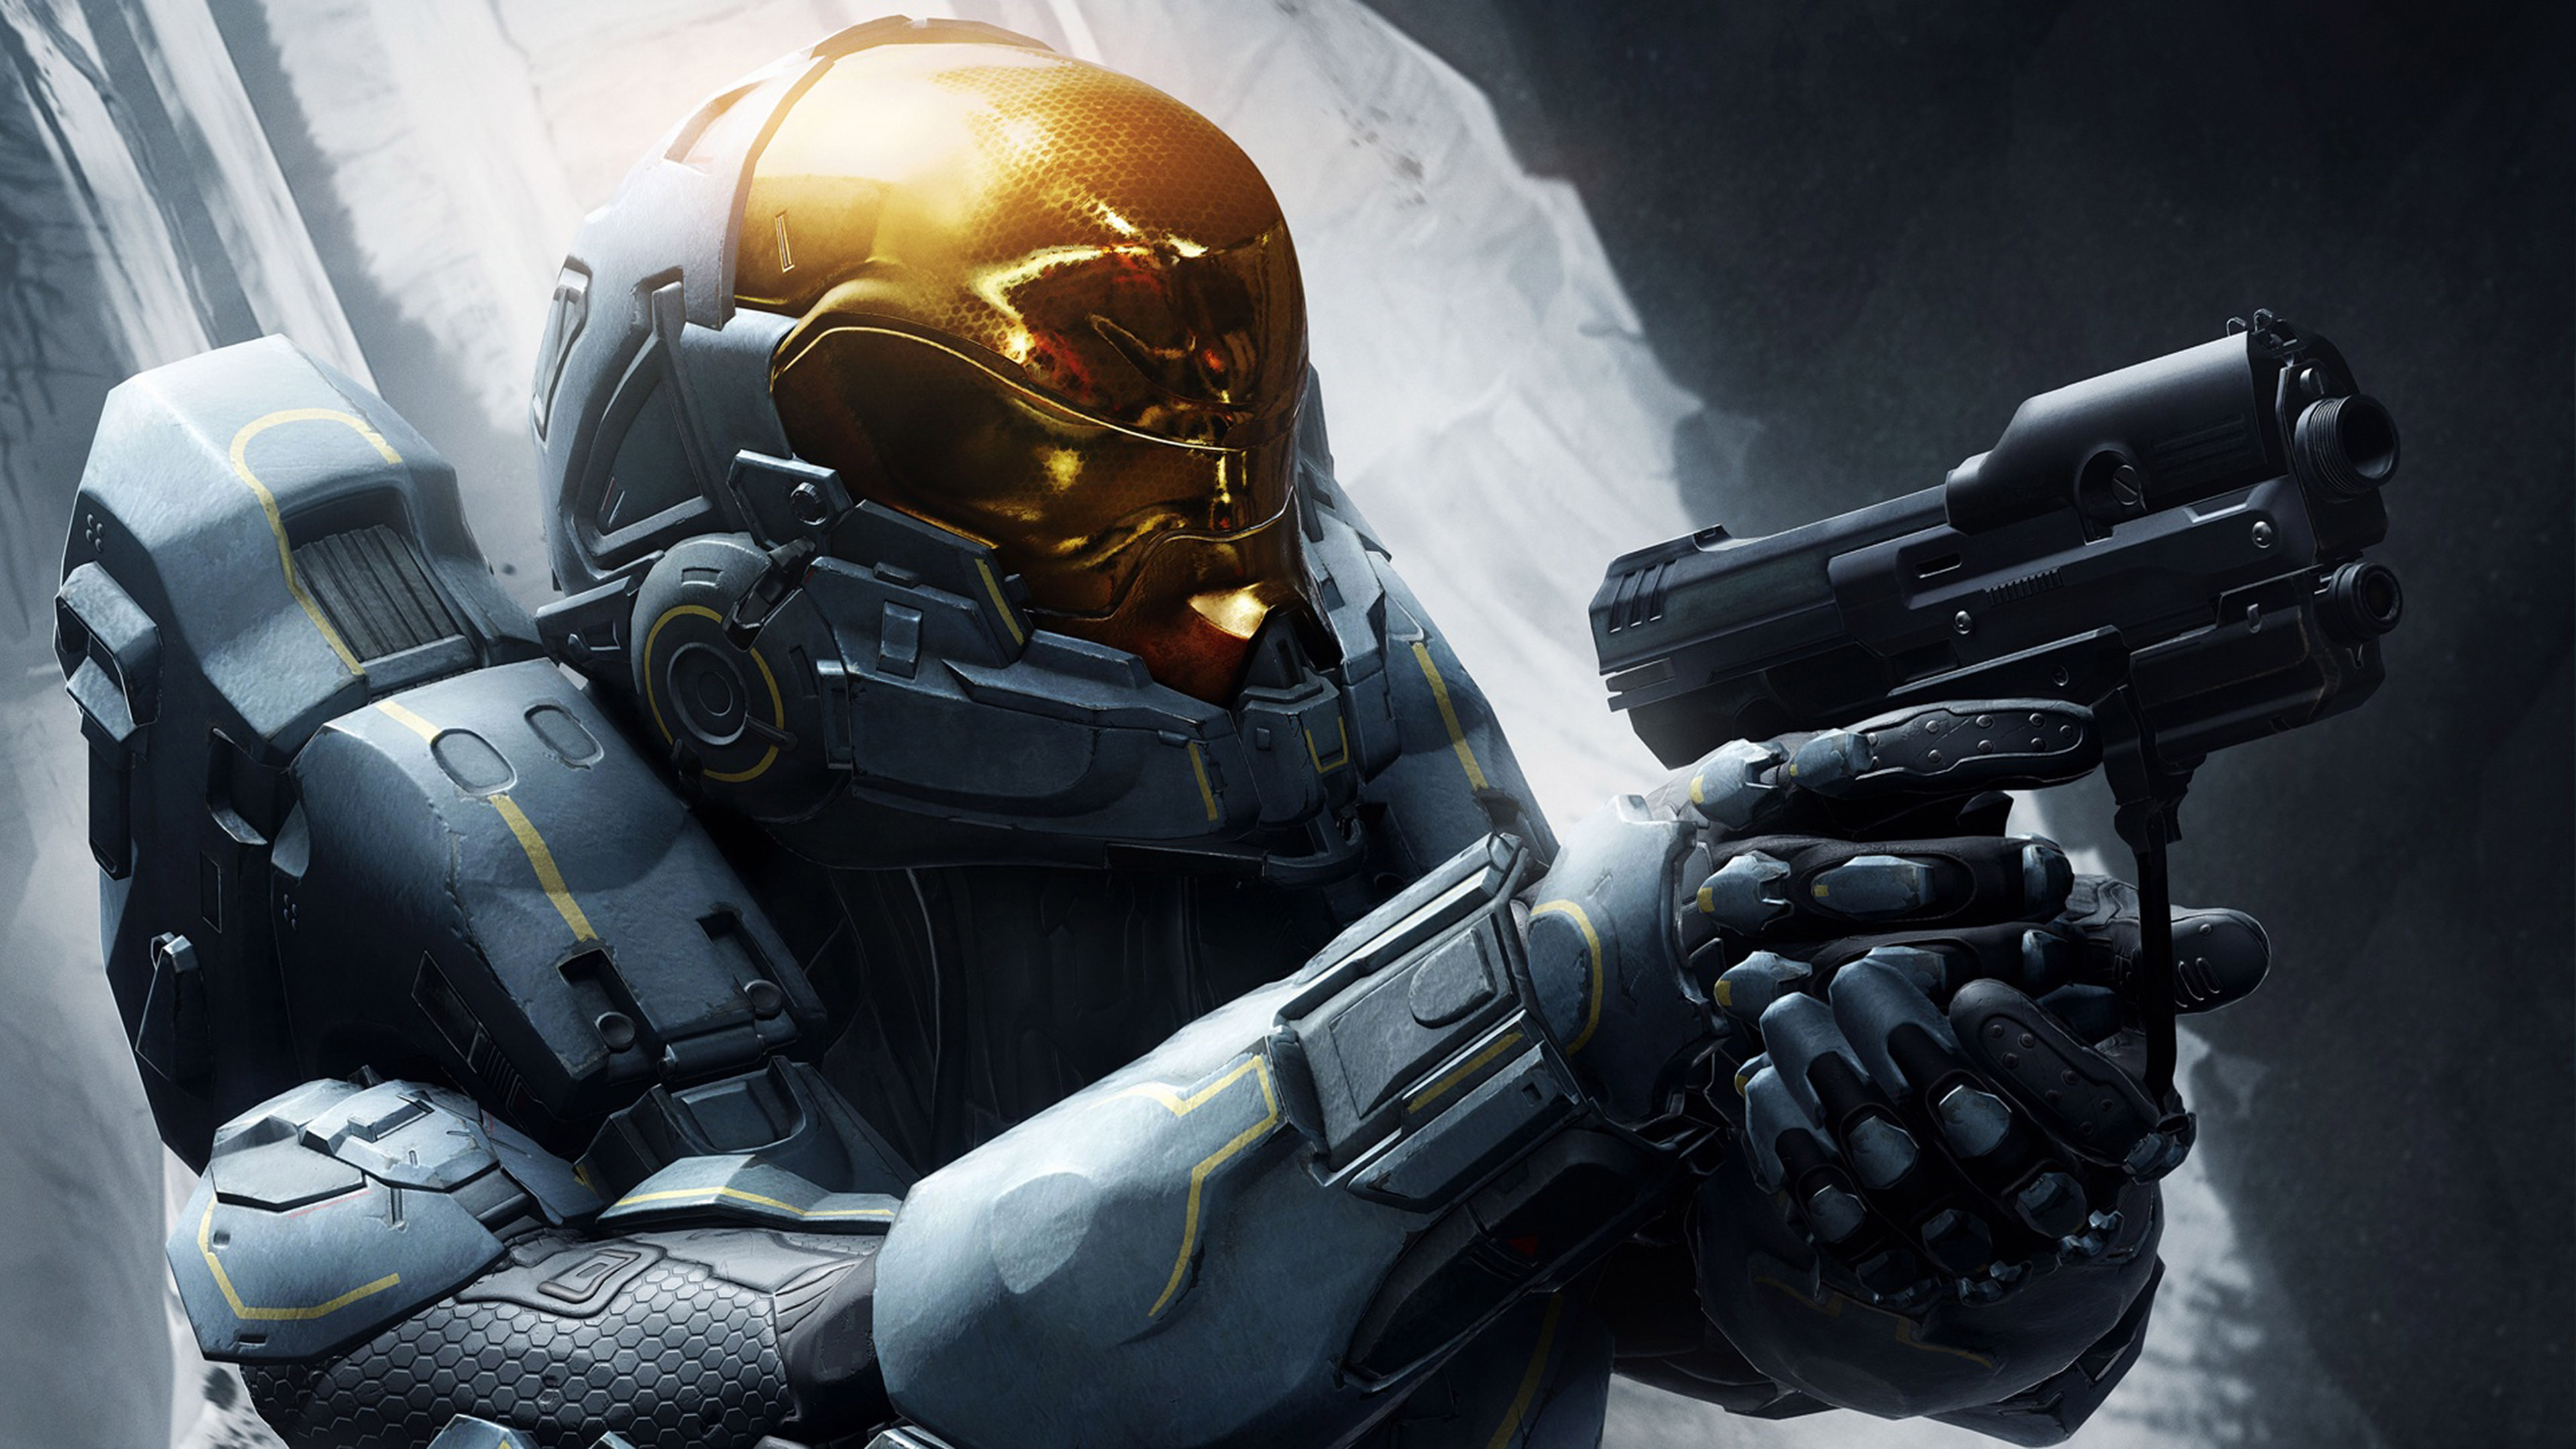 HD Background Halo Guardians Game Kelly Shooter Robot Wallpaper